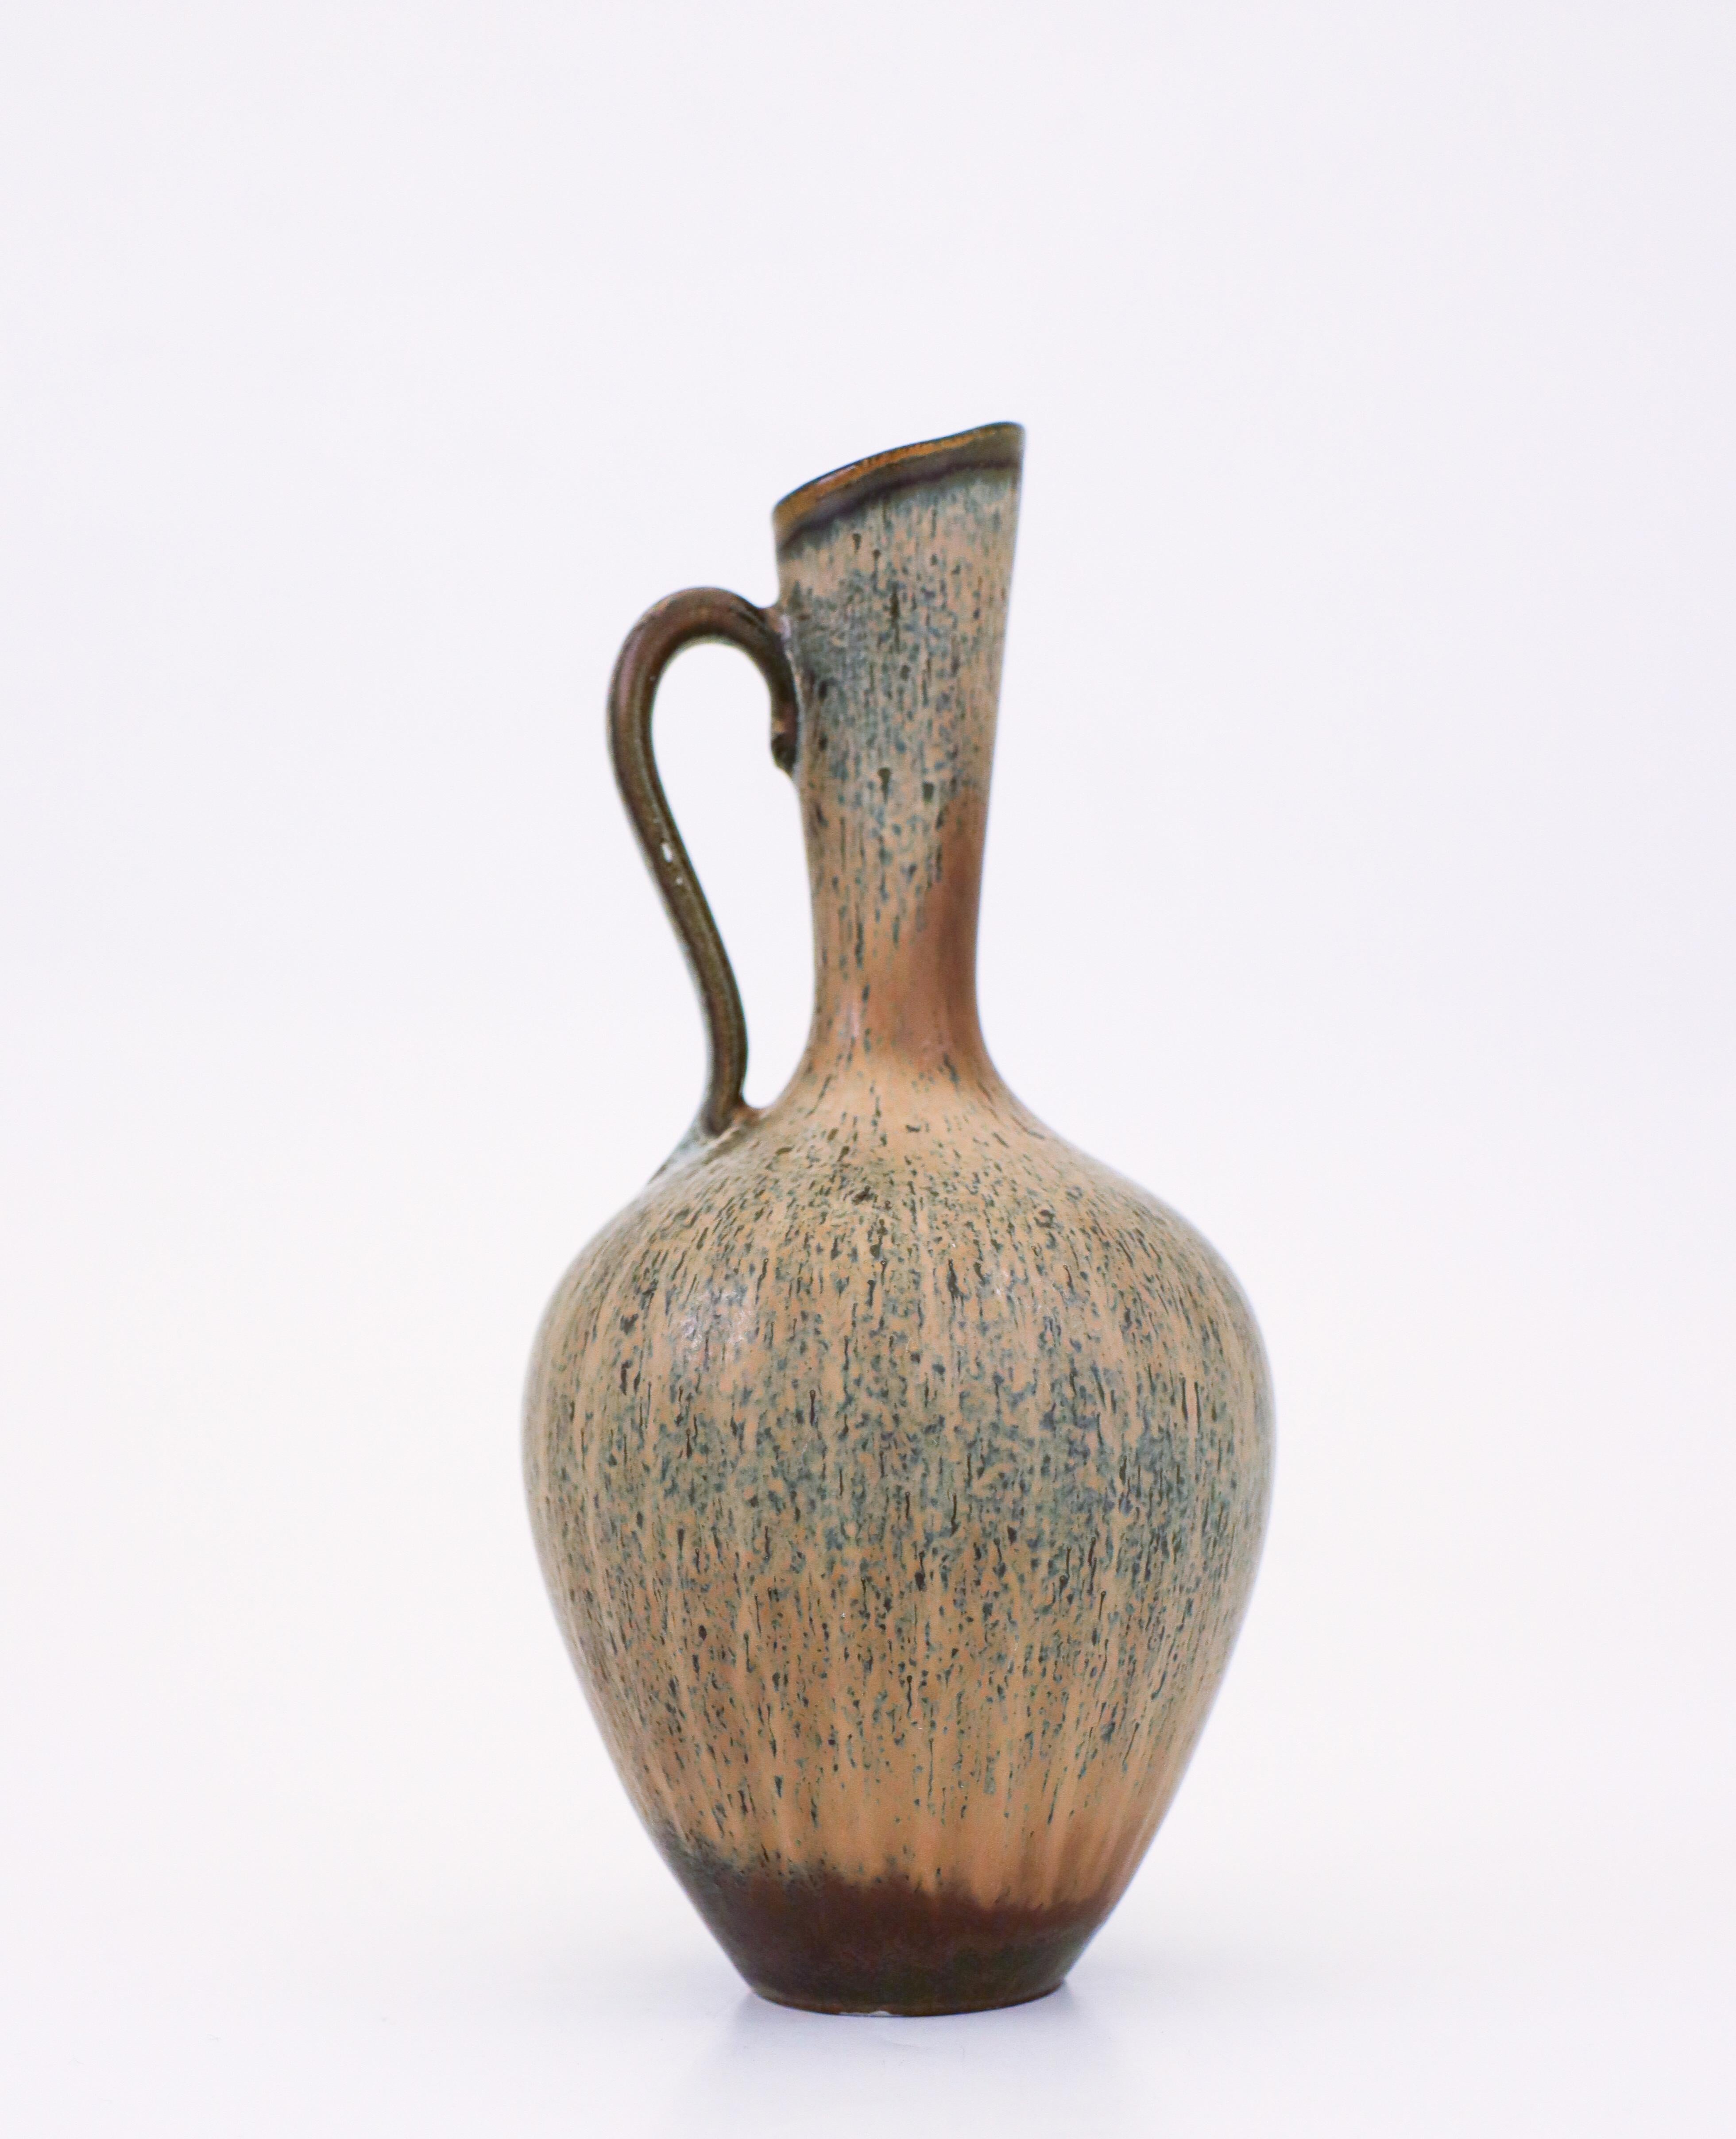 A gray speckled ceramic vase designed by Gunnar Nylund at Rörstrand. It is 17 cm (6.8